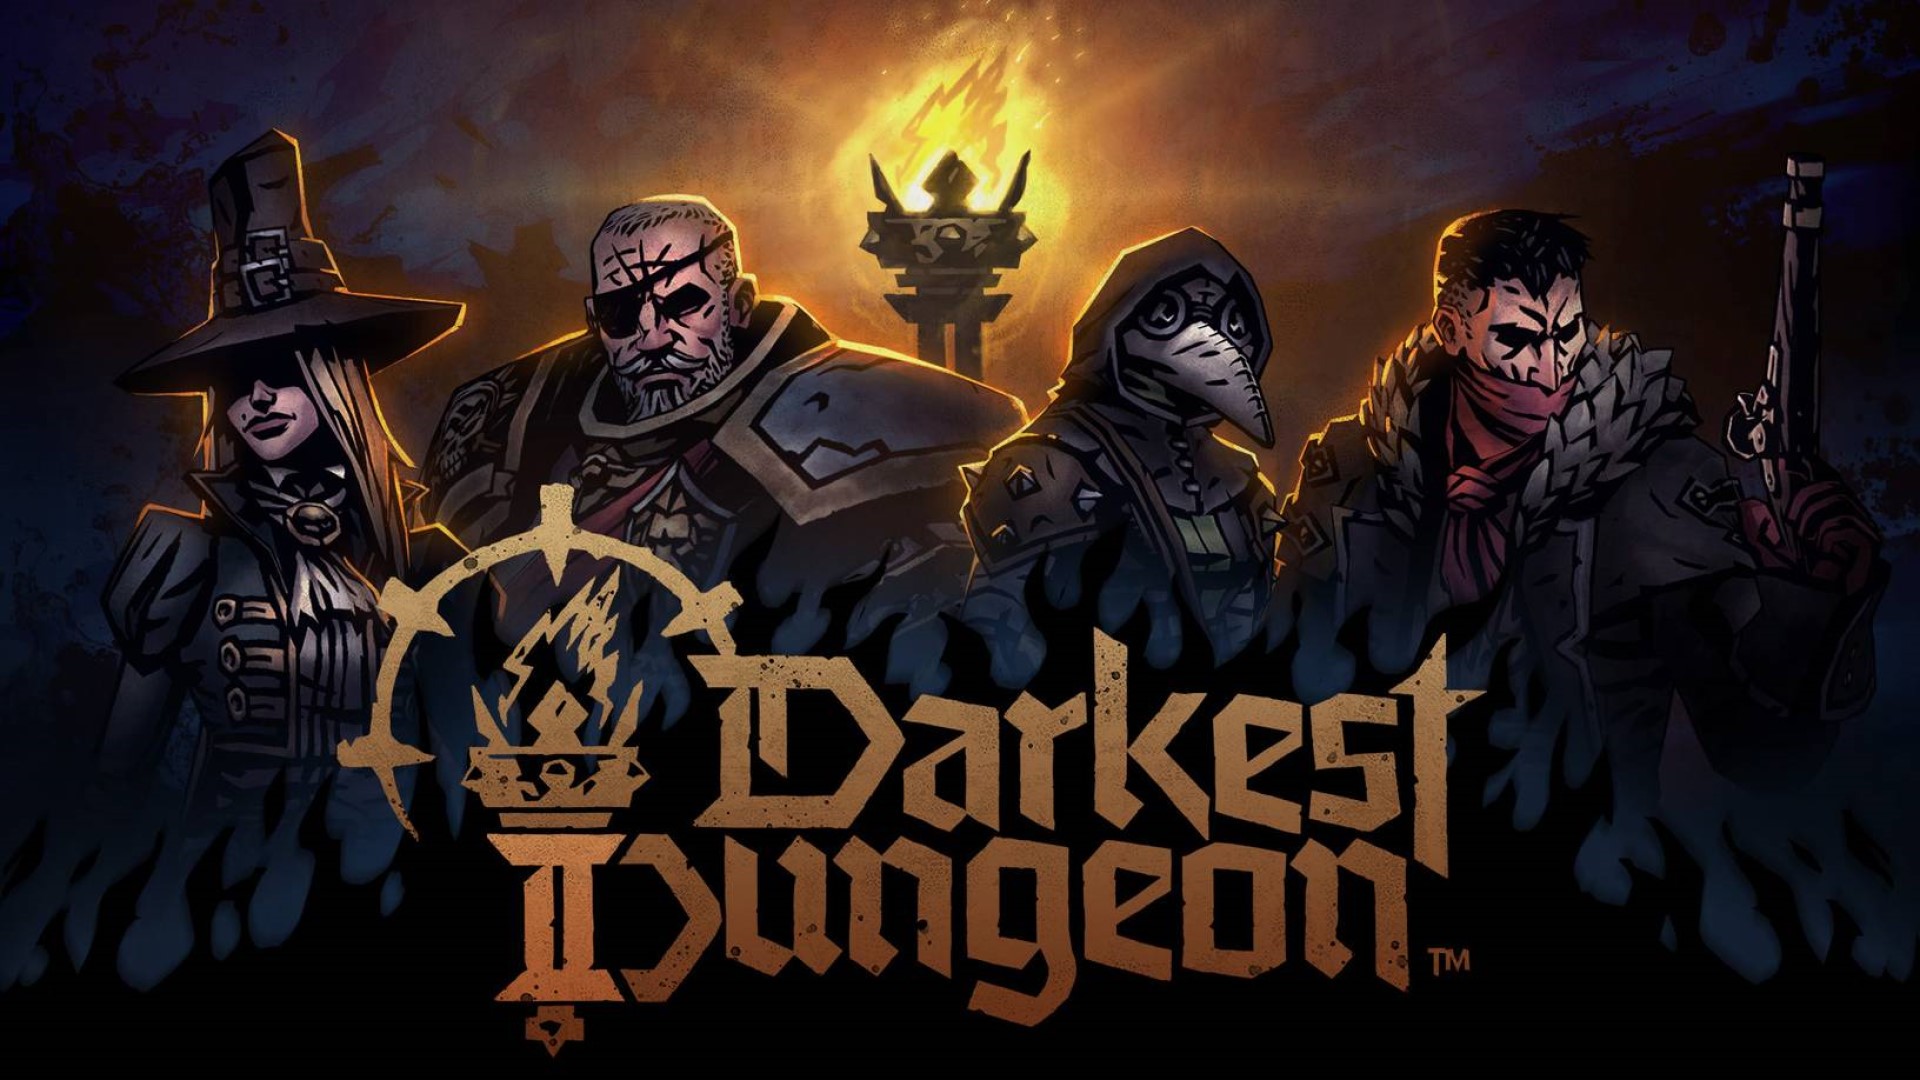 Darkest Dungeon II will be released on Xbox on 15 July: the same day the game will be available on PlayStation and Switch